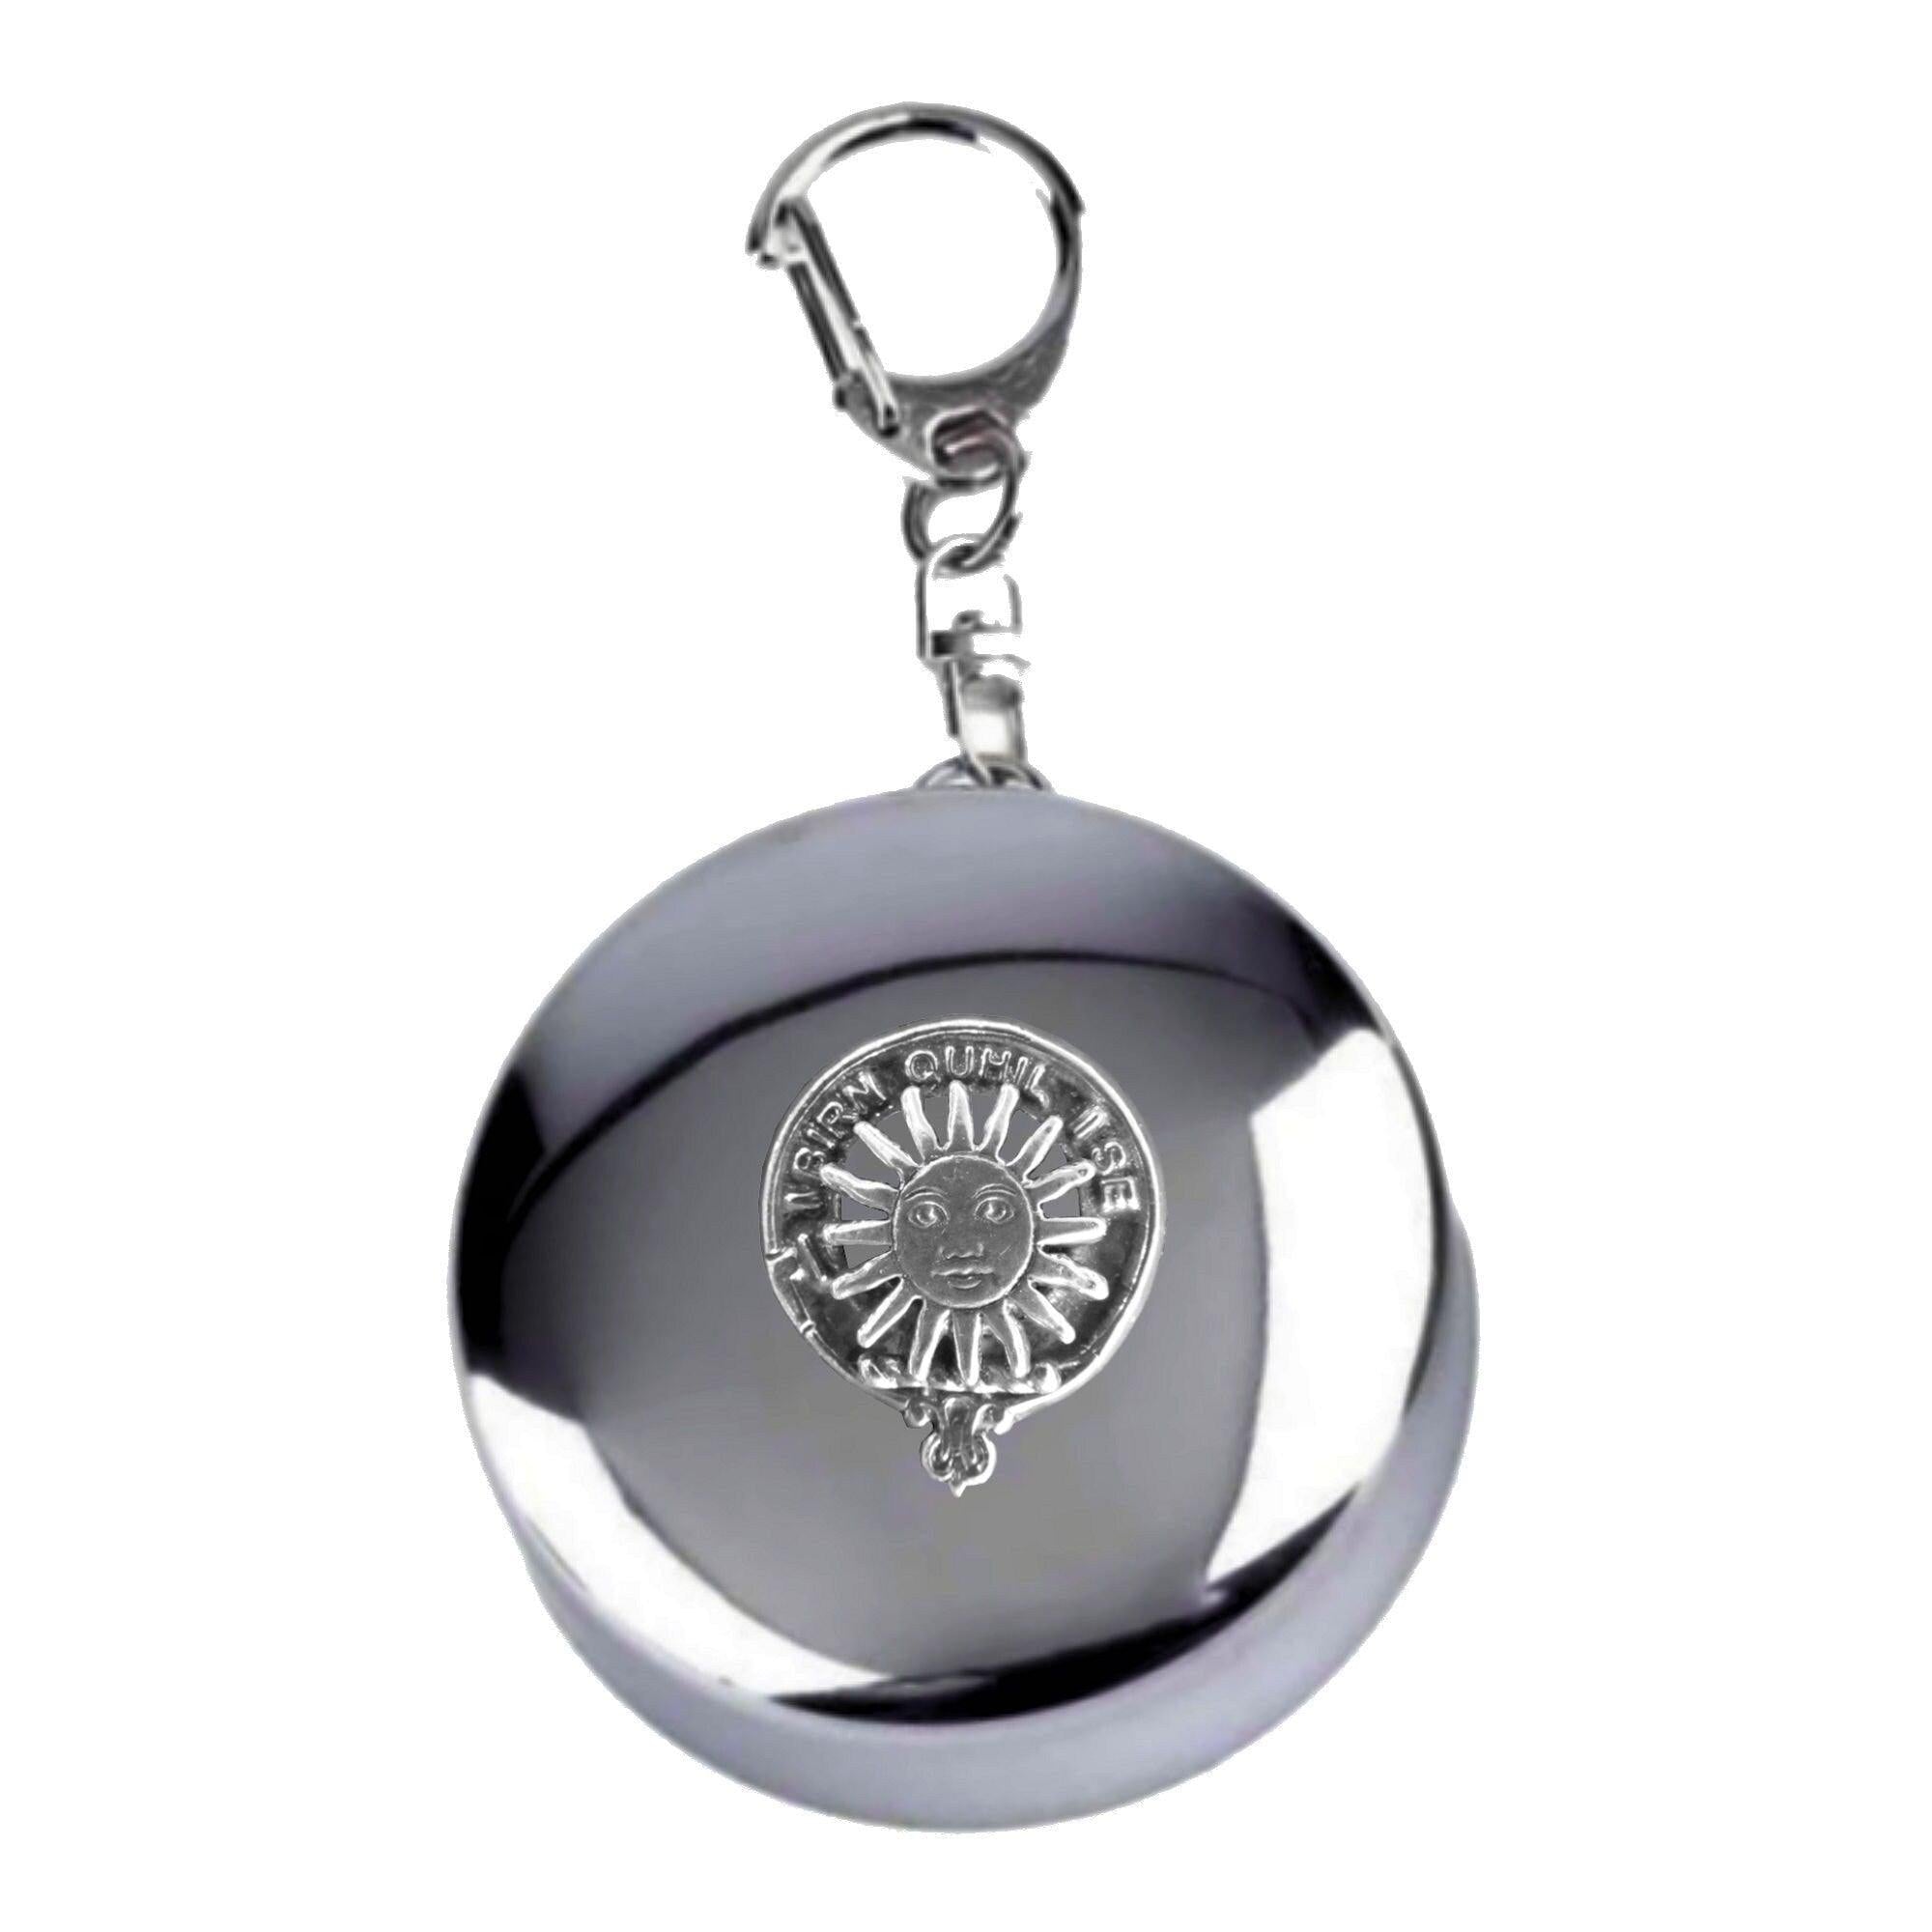 MacLeod (Lewis) Scottish Clan Crest Folding Cup Key Chain